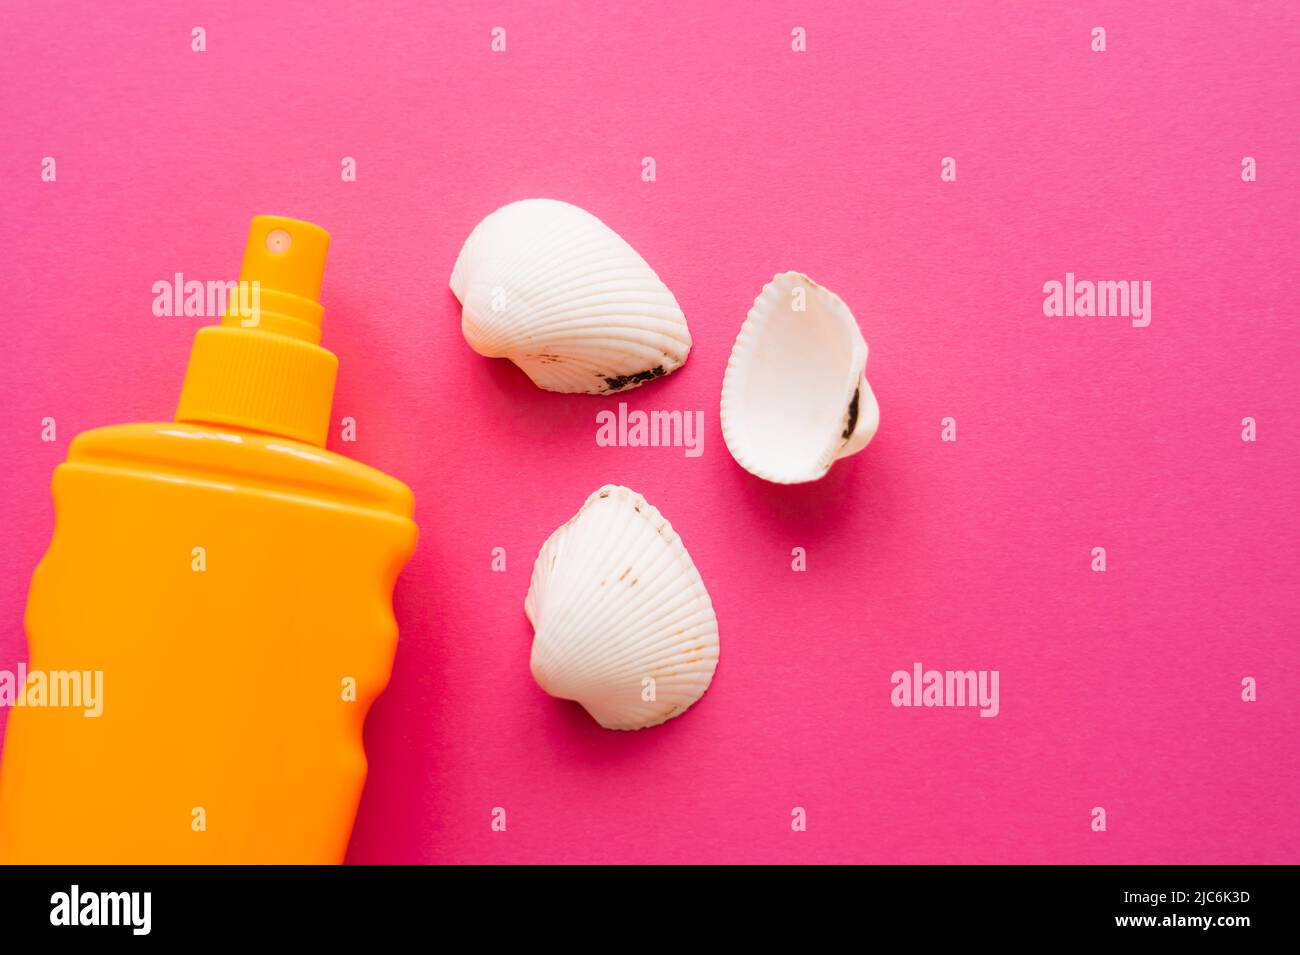 Top view of seashells and bottle of sunscreen on pink surface Stock Photo